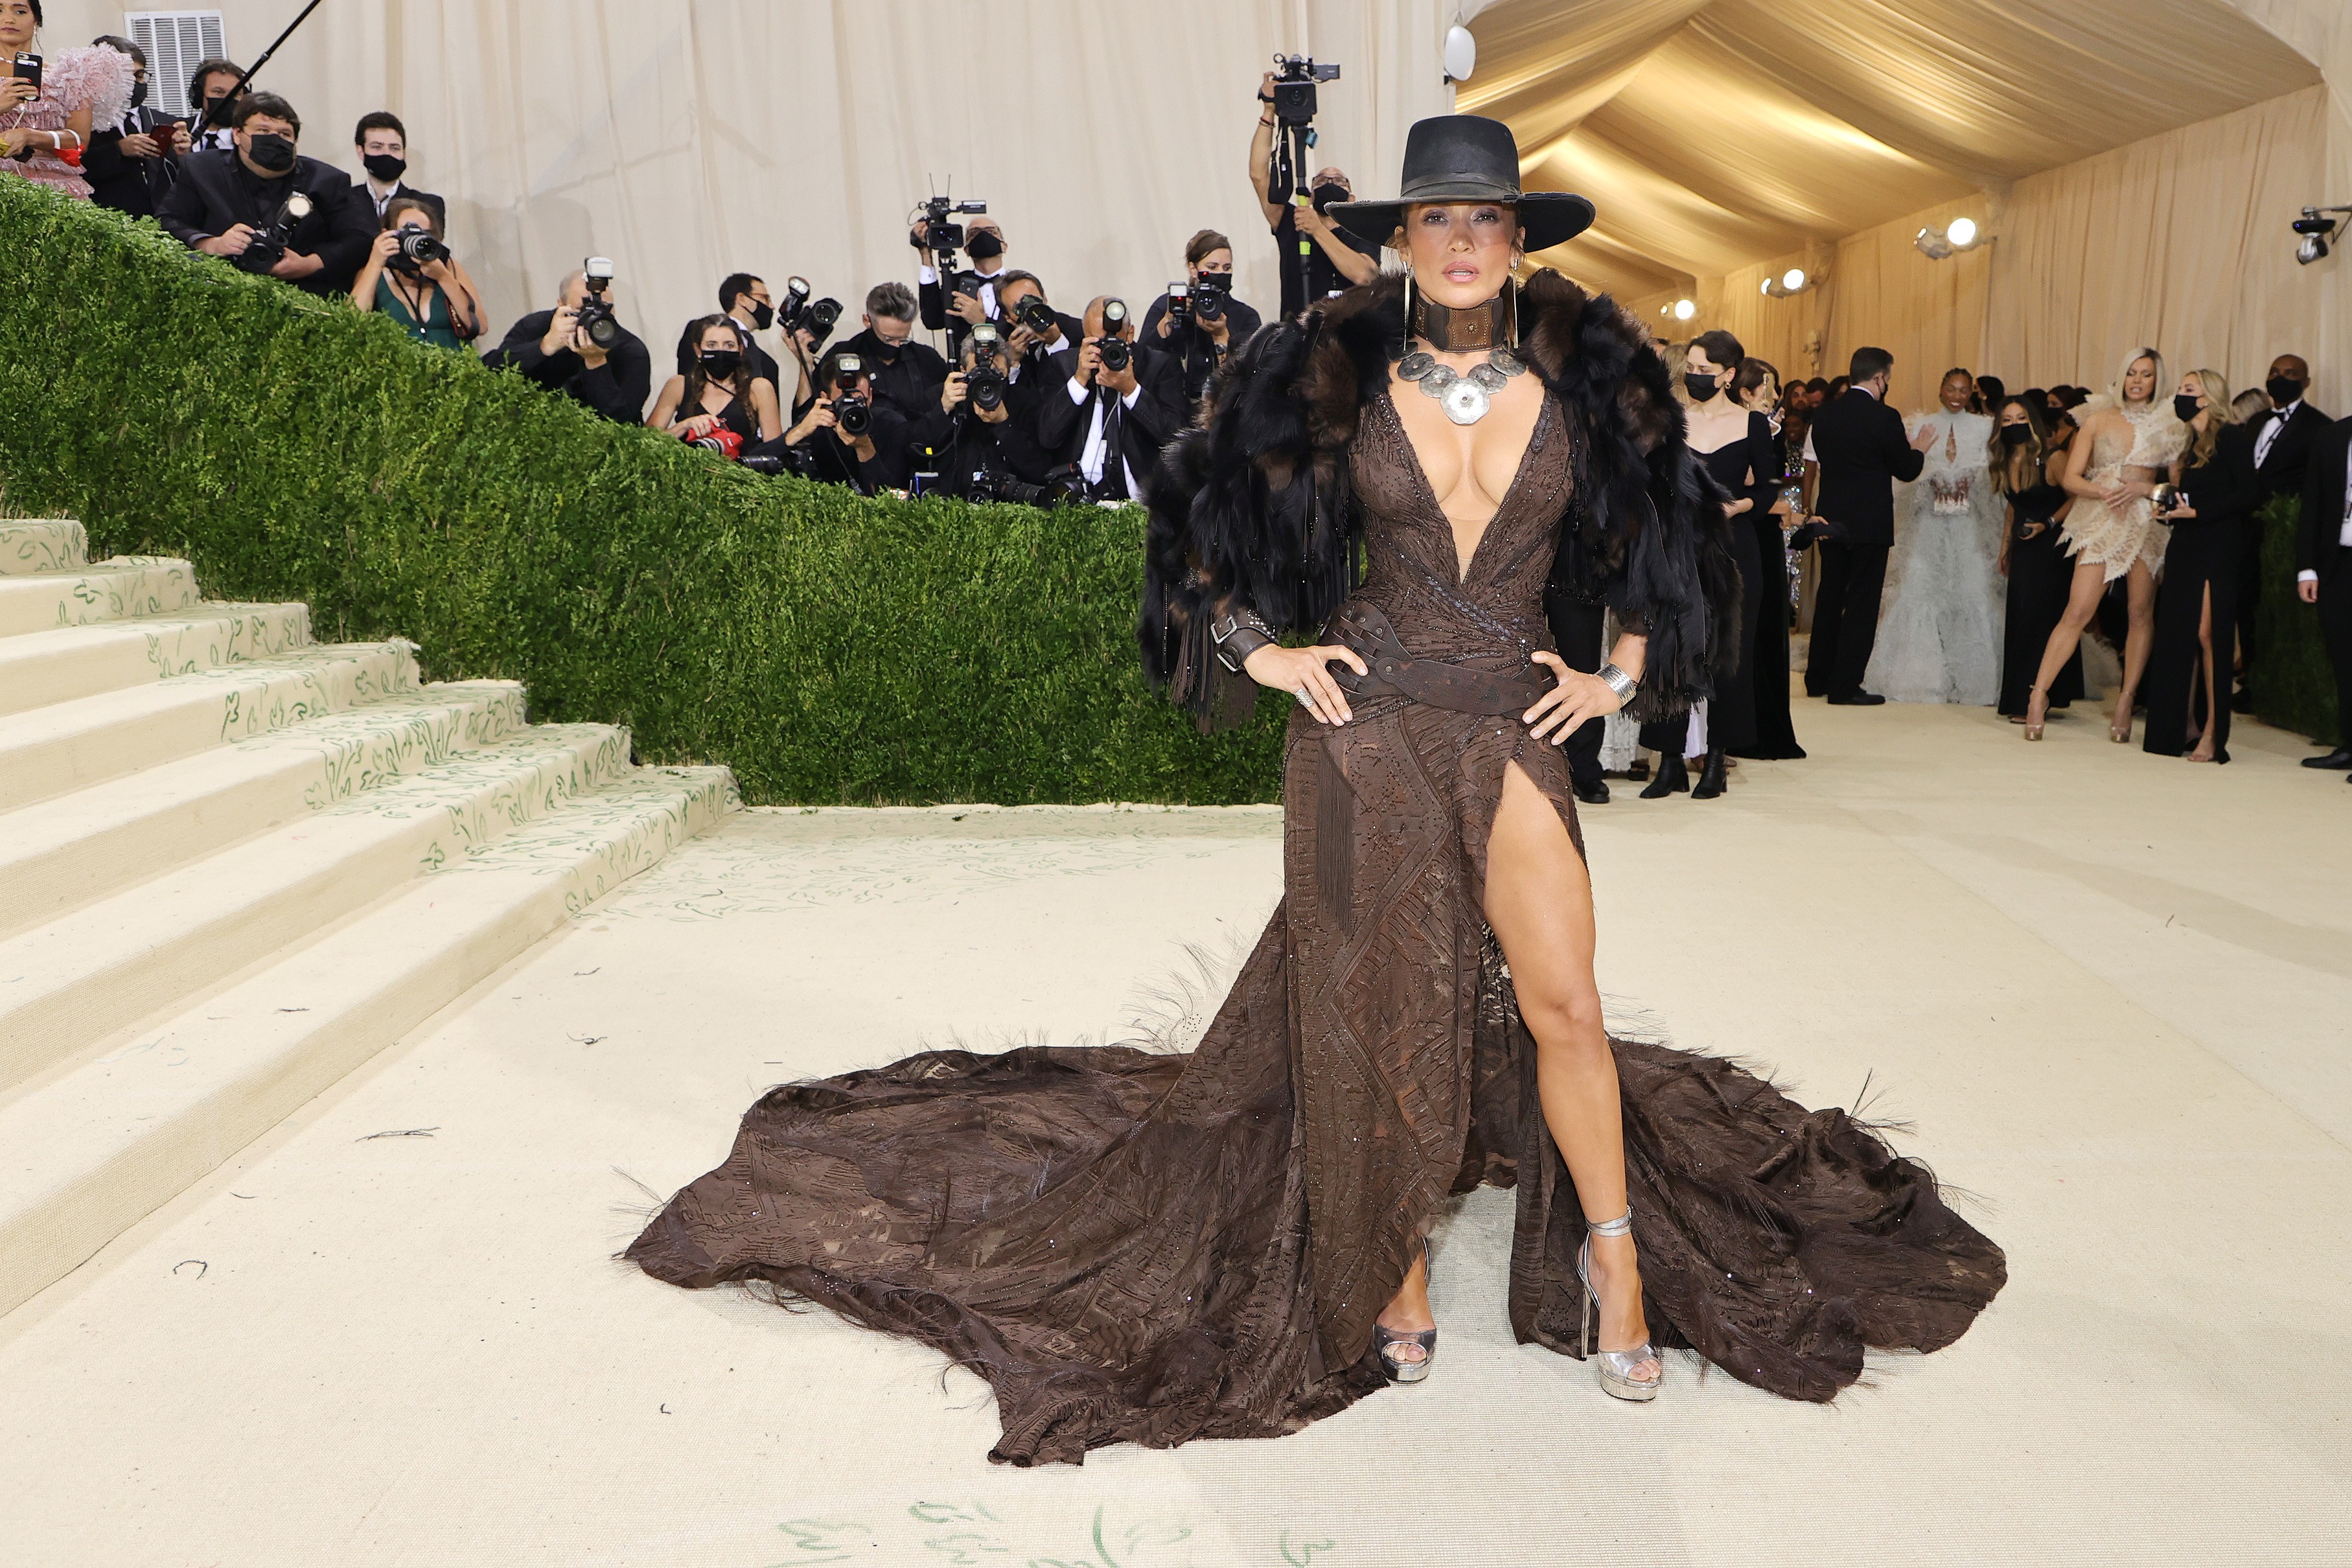 NEW YORK, NEW YORK - SEPTEMBER 13: Jennifer Lopez attends The 2021 Met Gala Celebrating In America: A Lexicon Of Fashion at Metropolitan Museum of Art on September 13, 2021 in New York City. (Photo by Mike Coppola/Getty Images) (Foto: Getty Images)